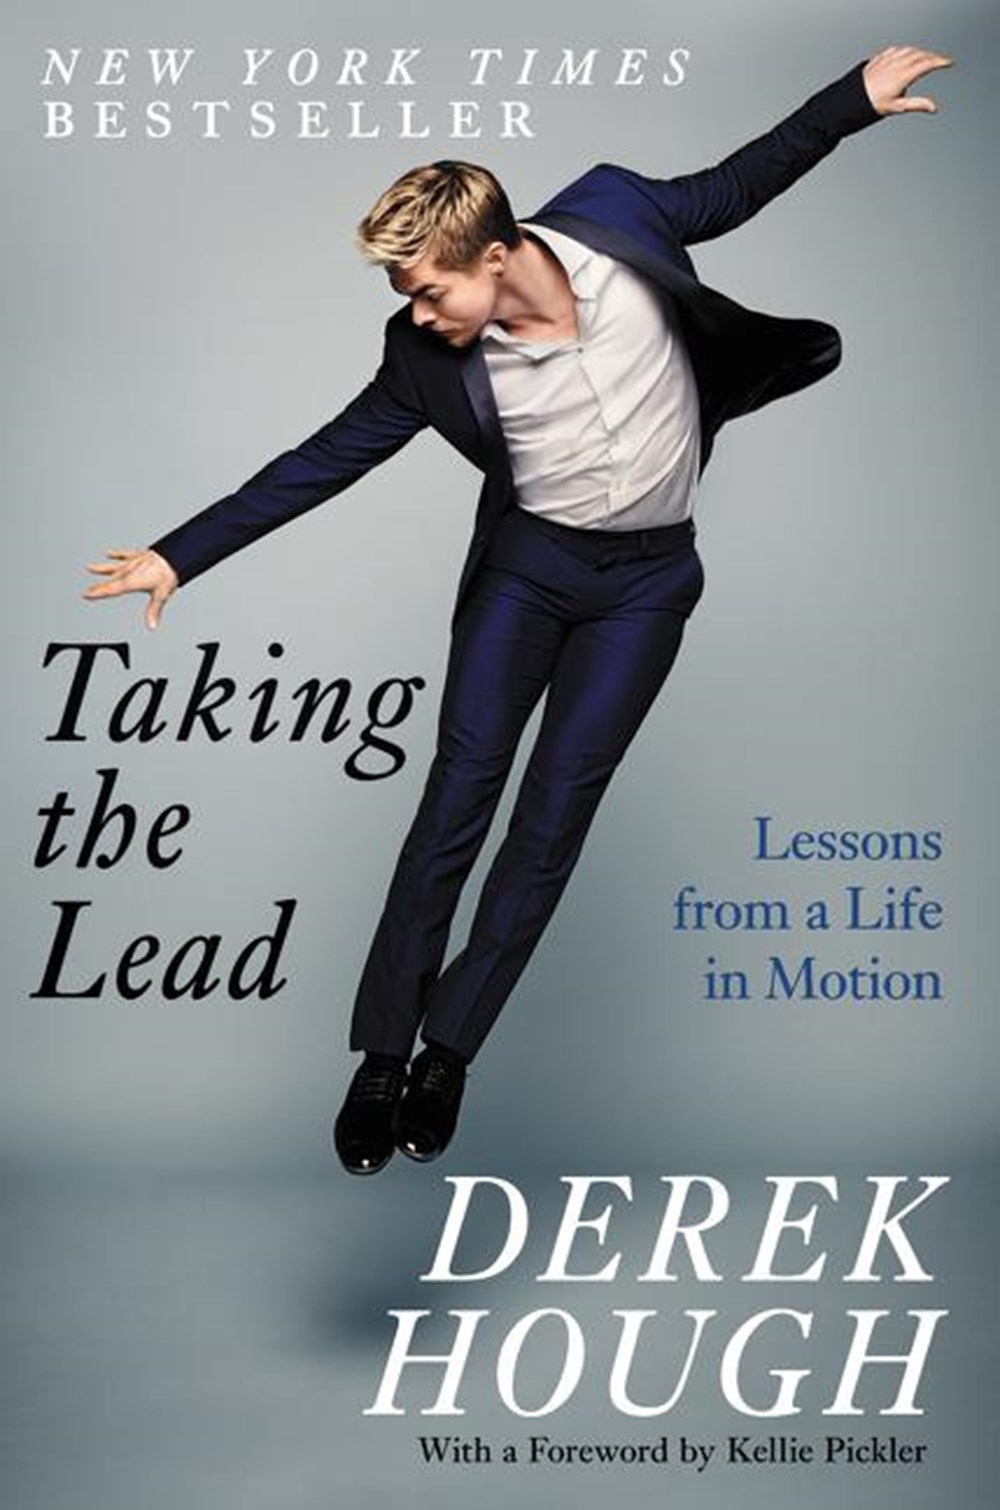 Taking the Lead: Lessons from a Life in Motion